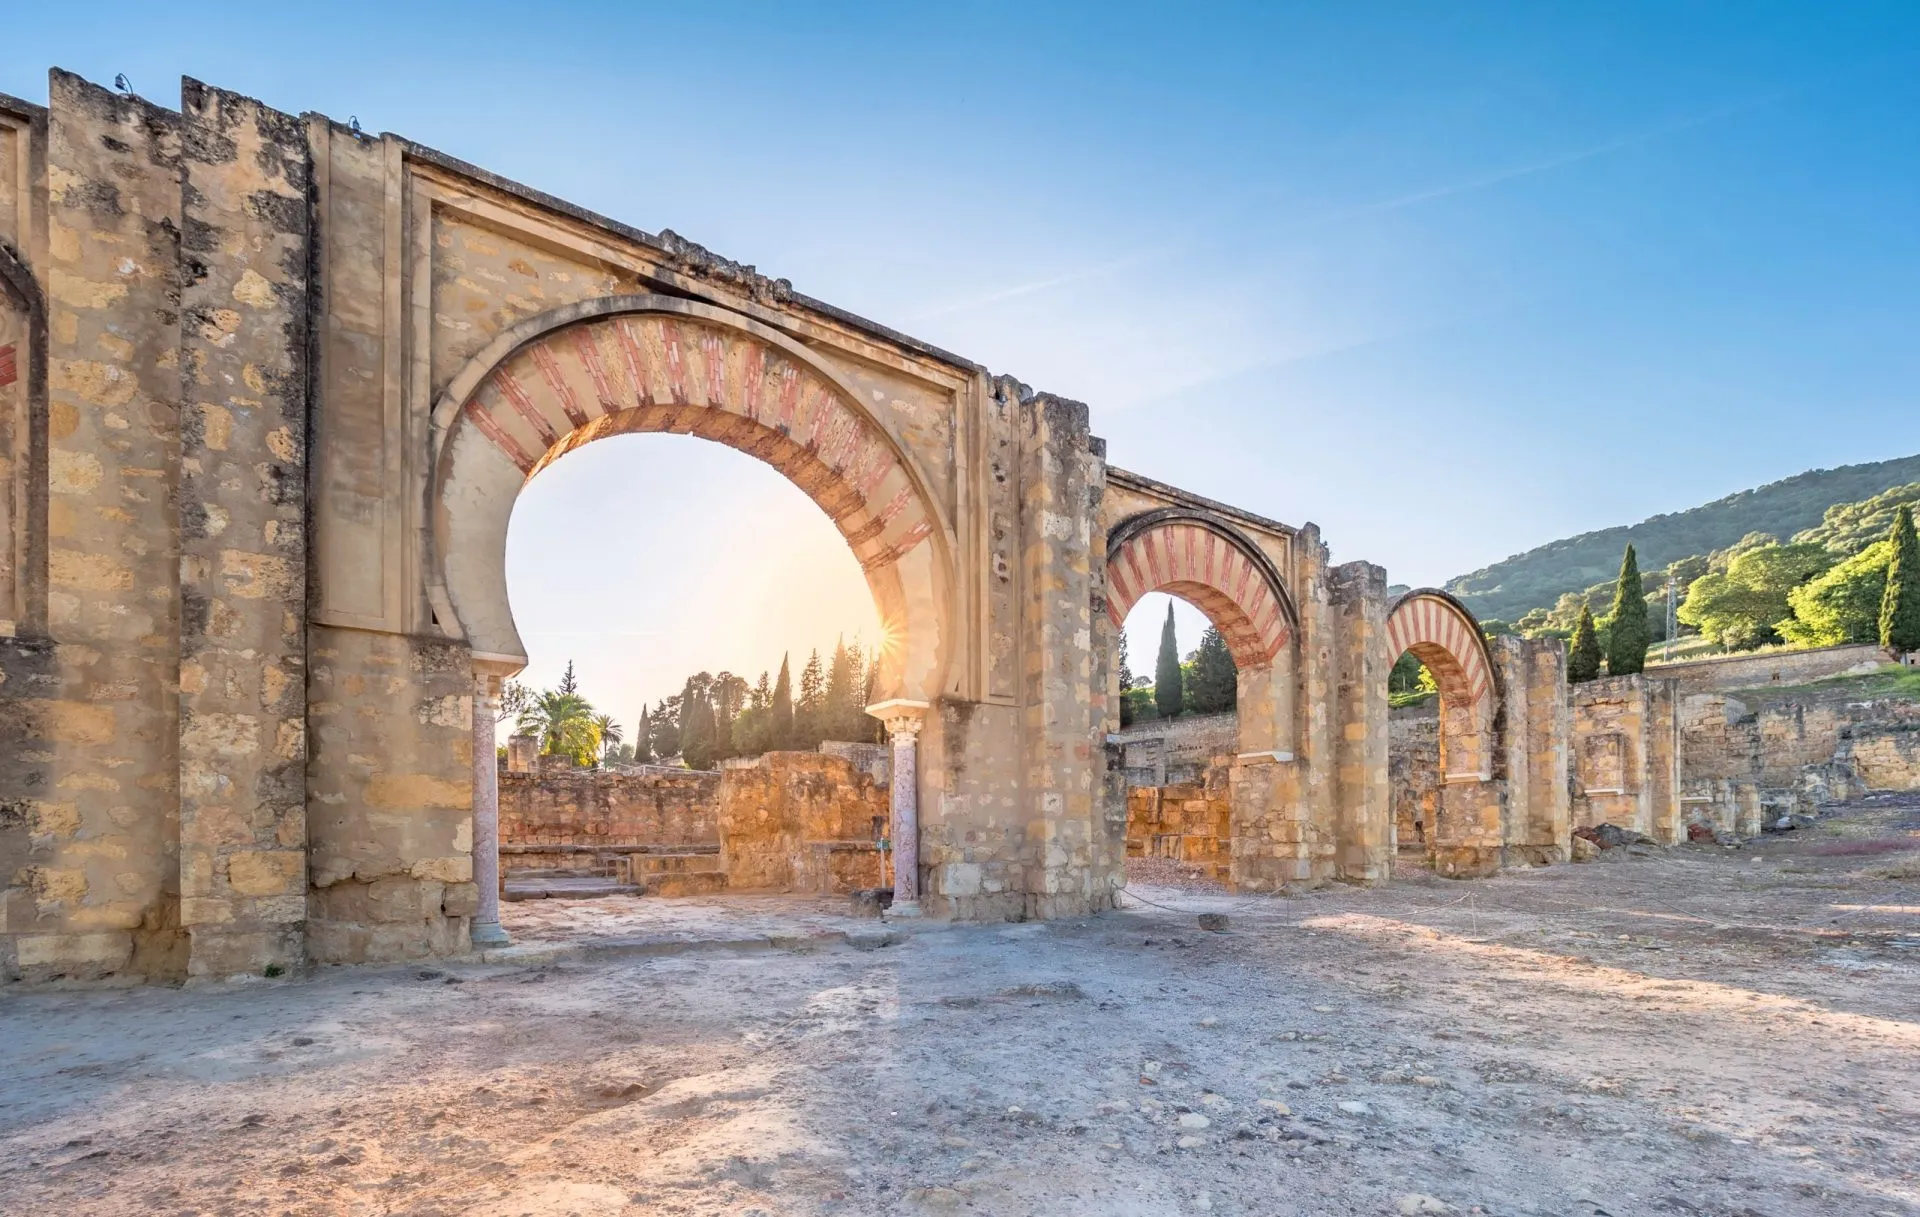 Detail of an arab arch in the ruins of Medina Azahara in Cordoba, Spain at sunset.